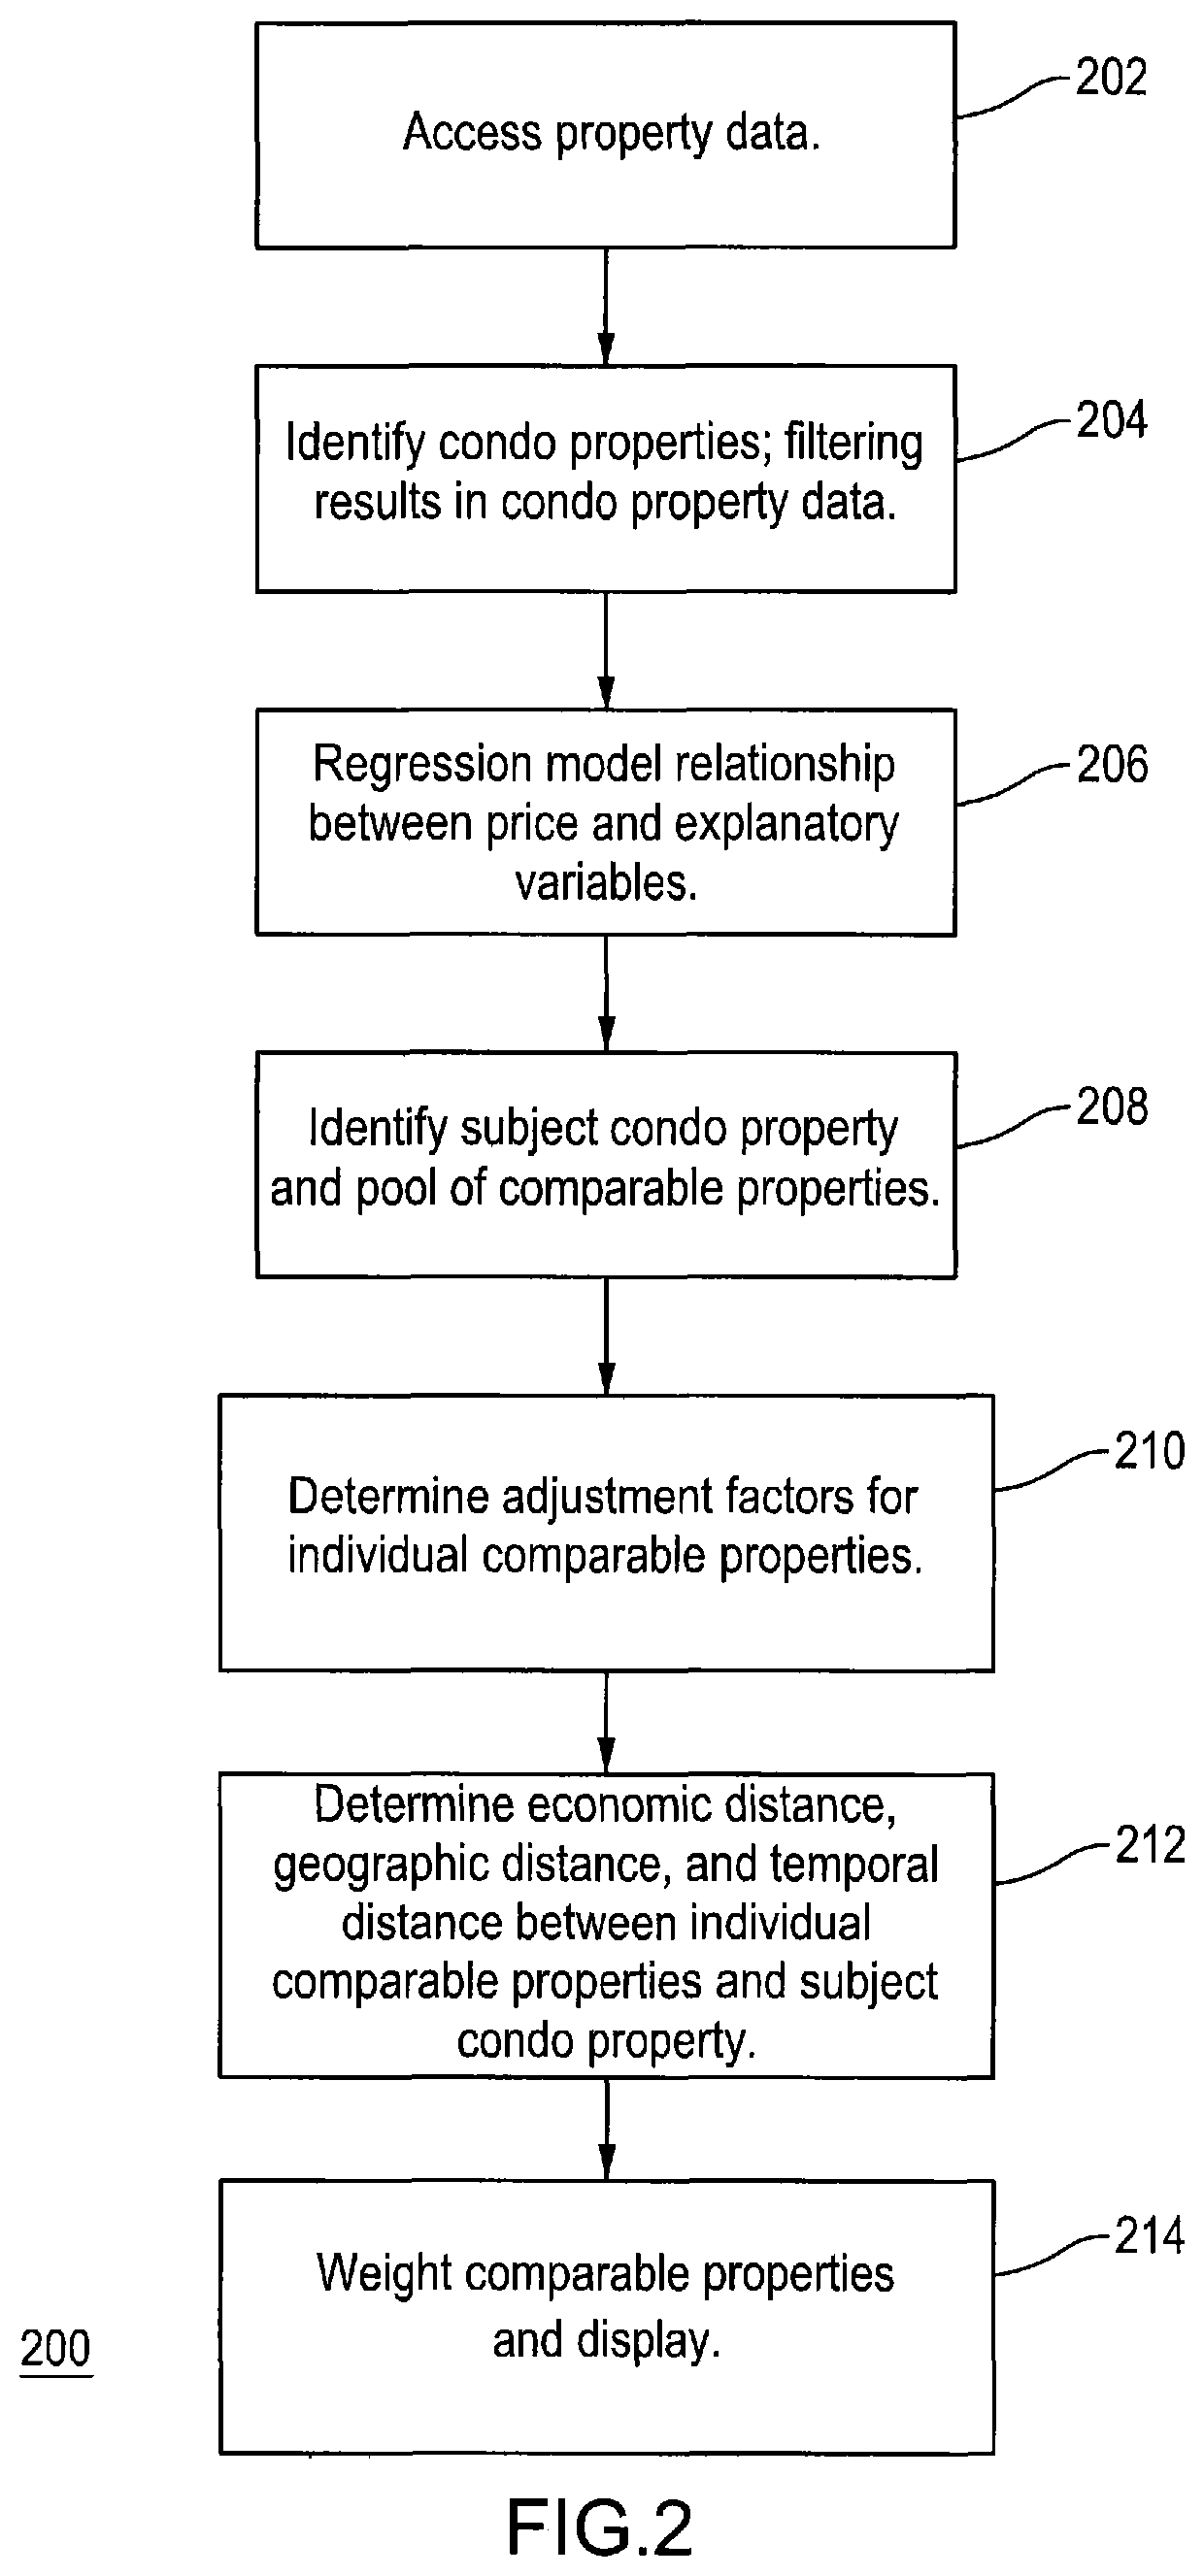 Modeling comparable properties where the subject property is a condominium property